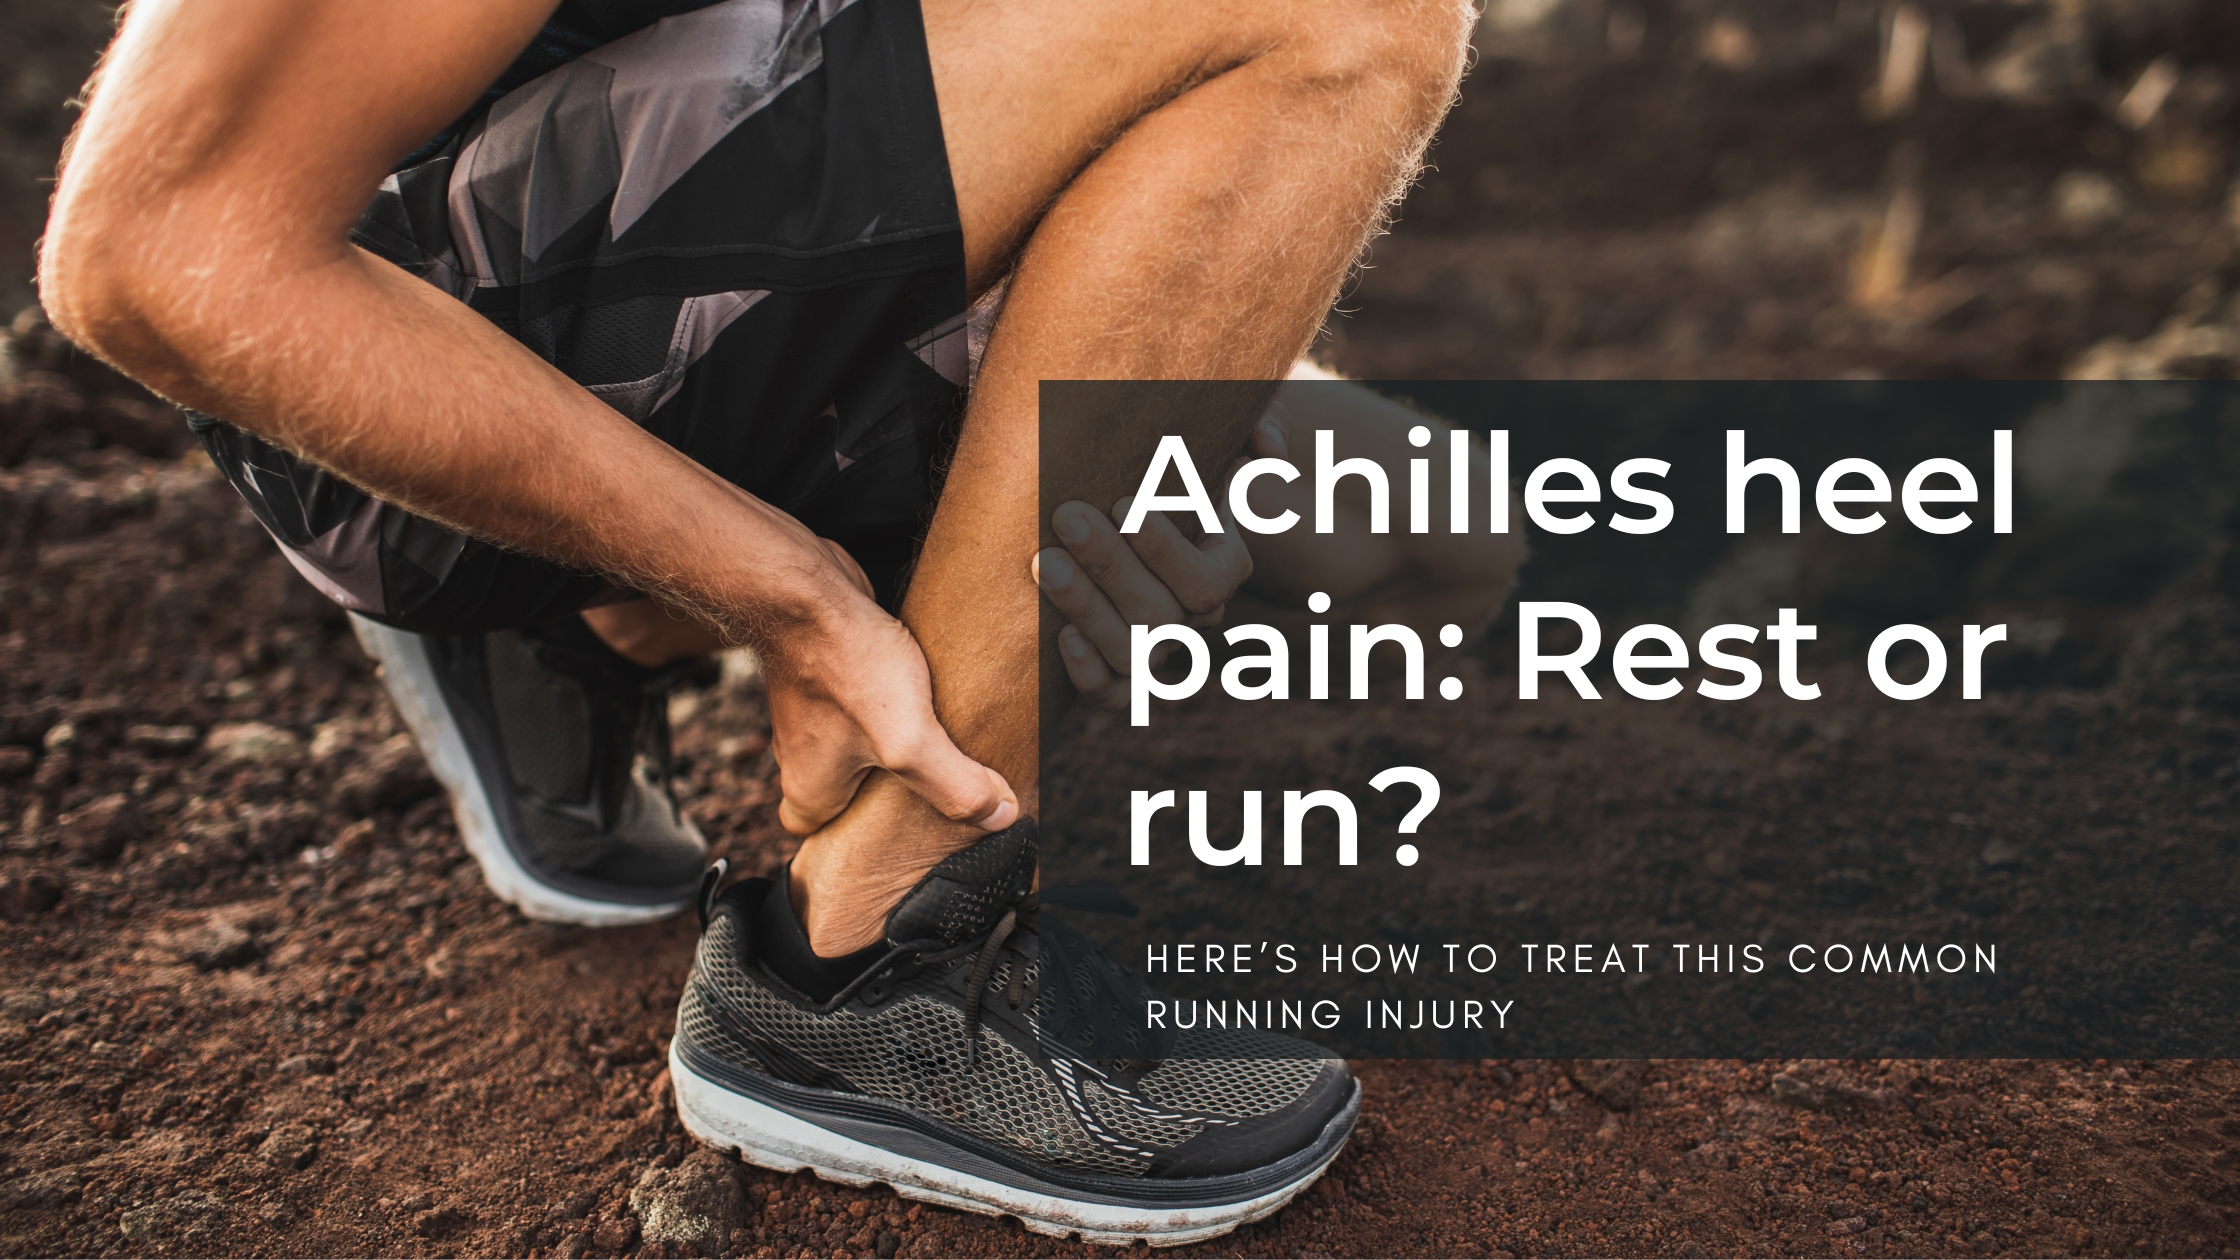 Should you rest or run with Achilles heel pain?